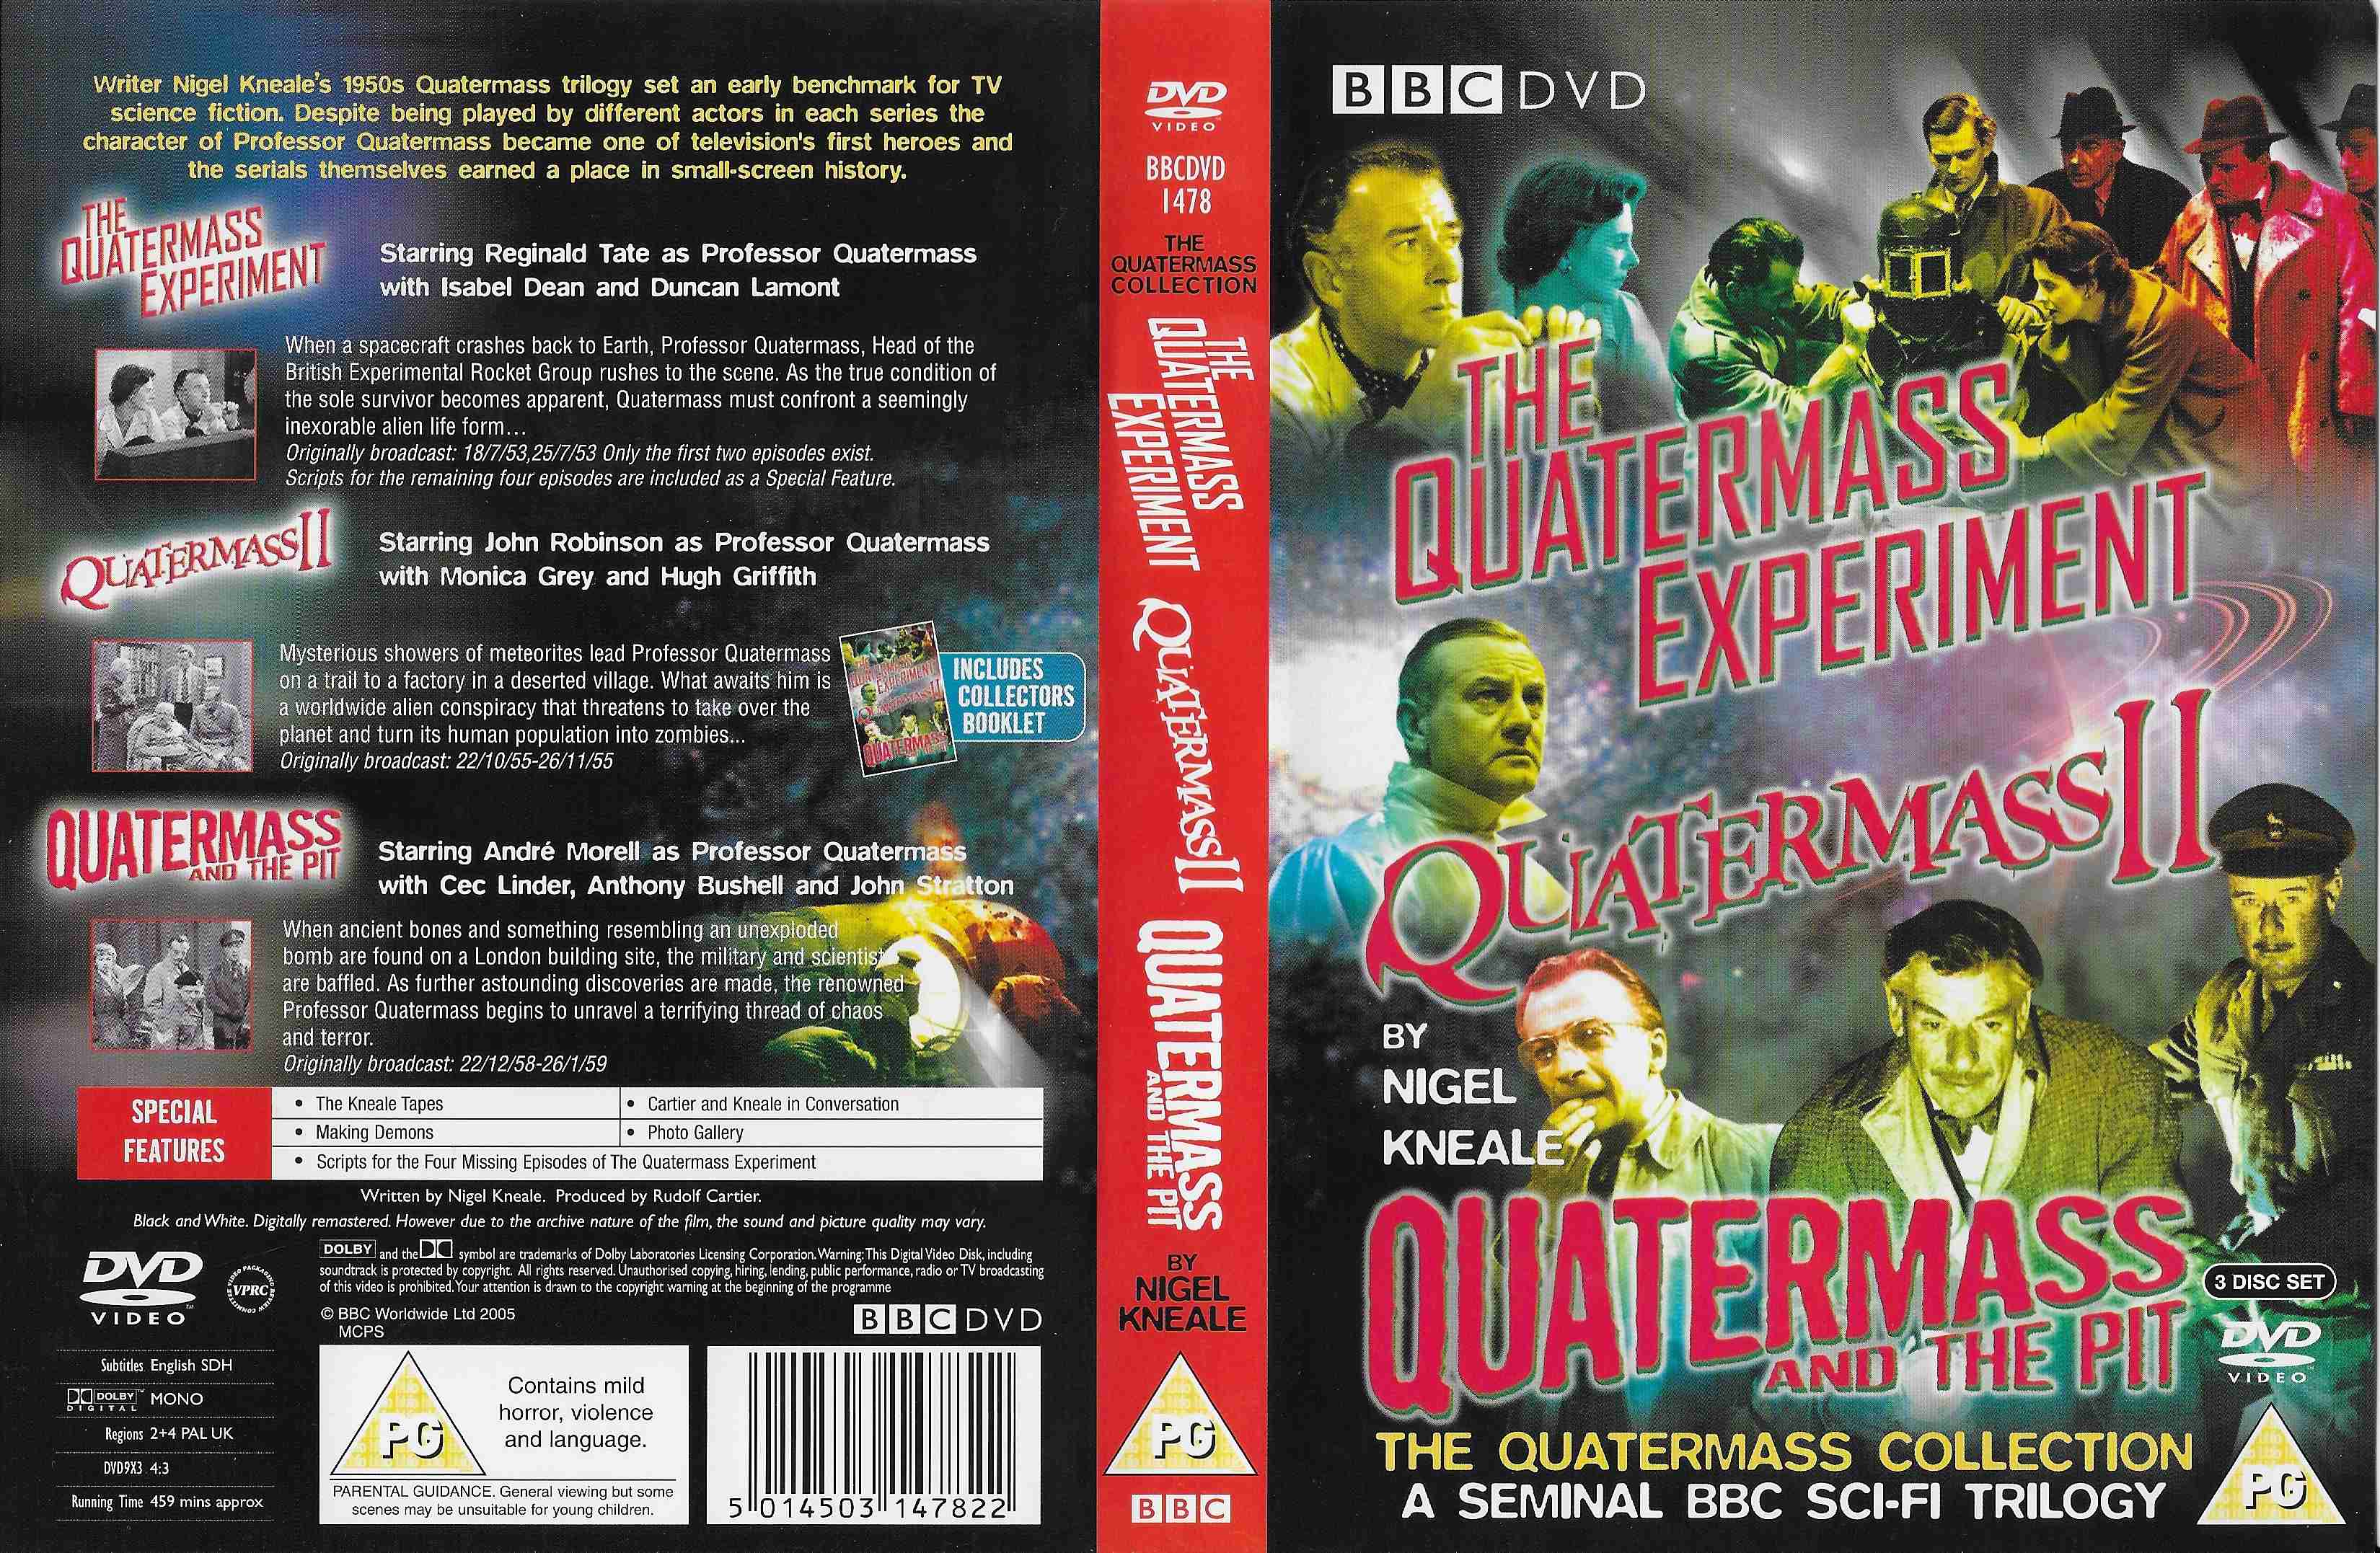 Picture of BBCDVD 1478 The Quatermass collection by artist Nigel Kneale from the BBC records and Tapes library